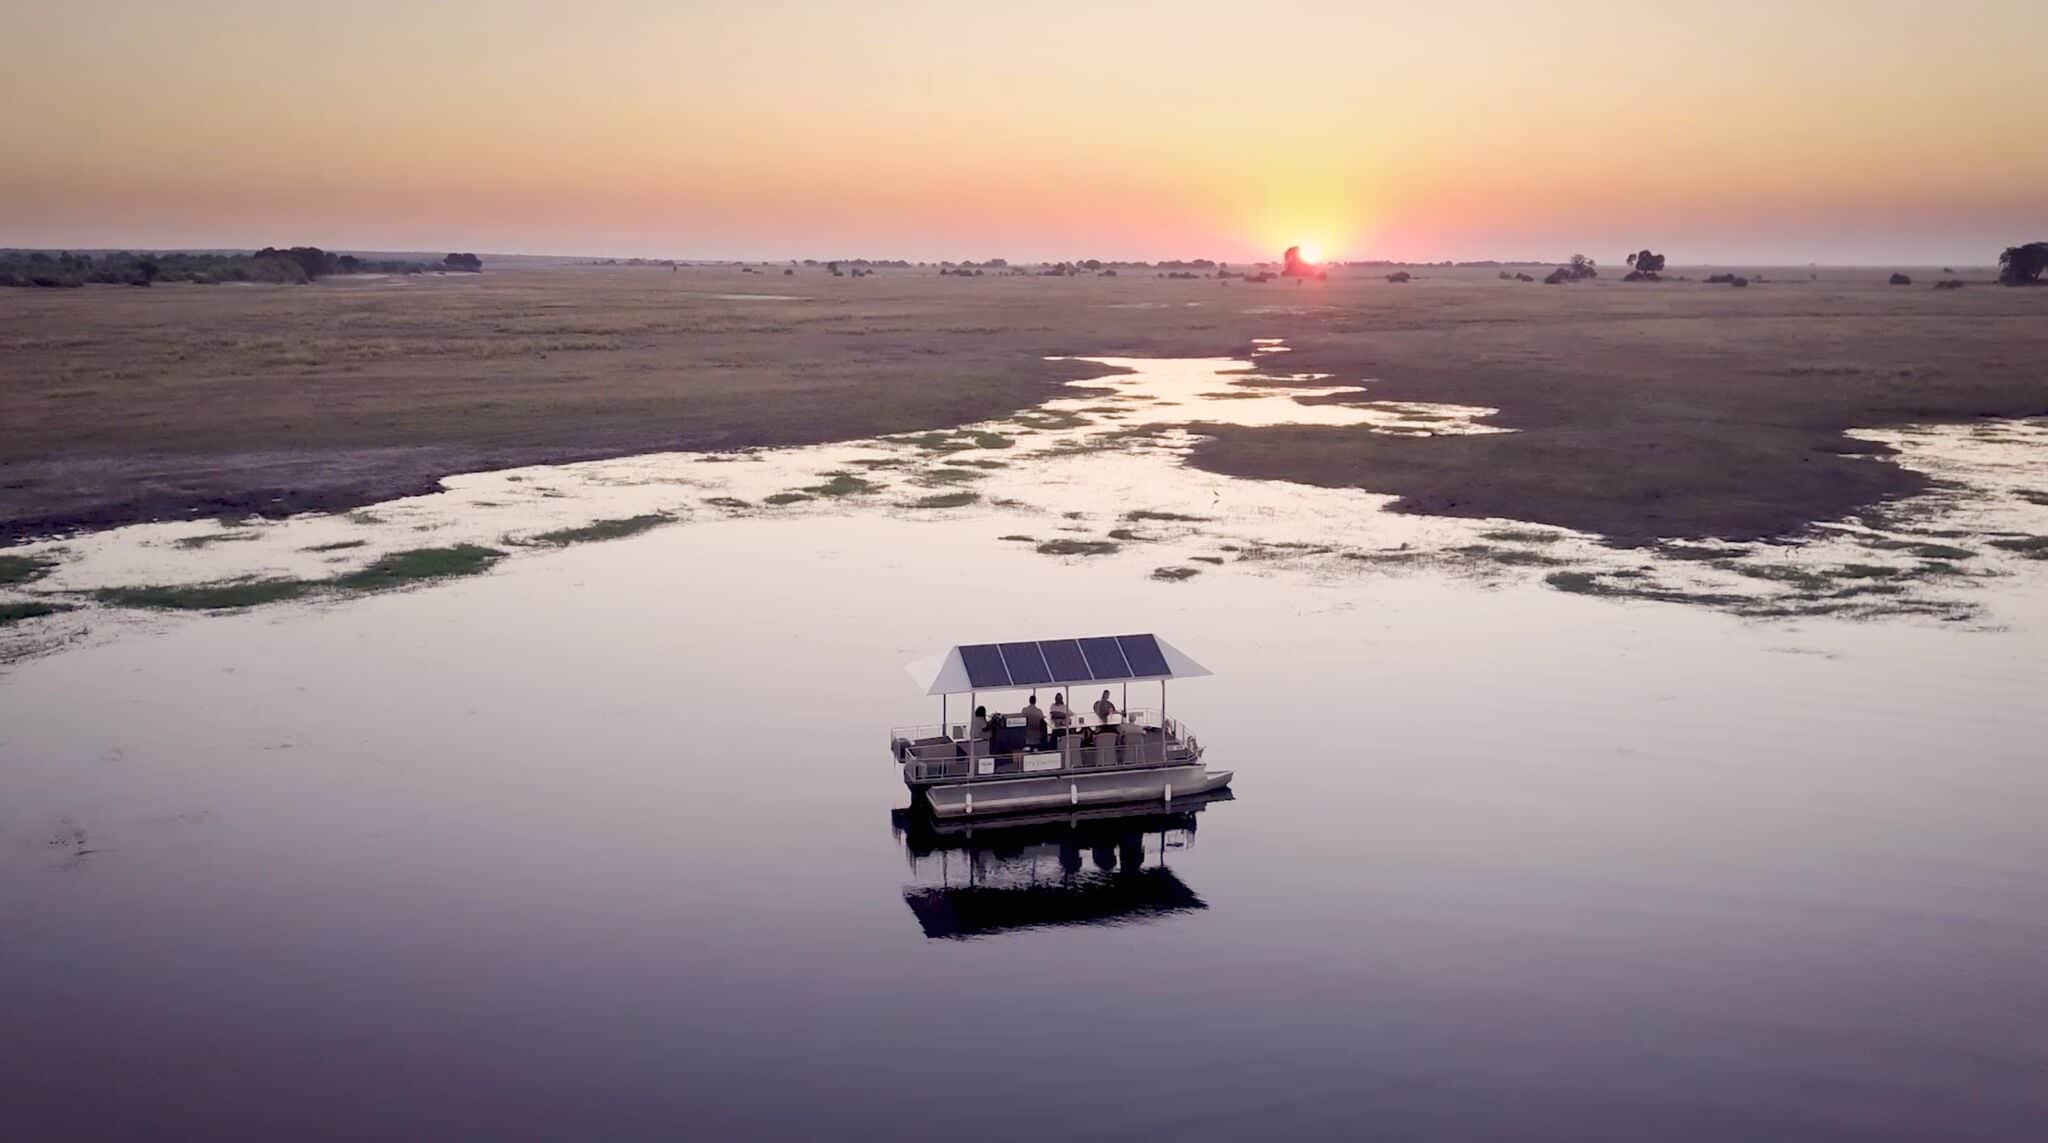 Chobe Game Lodge gives just the right touch of luxury in the heart of Africa